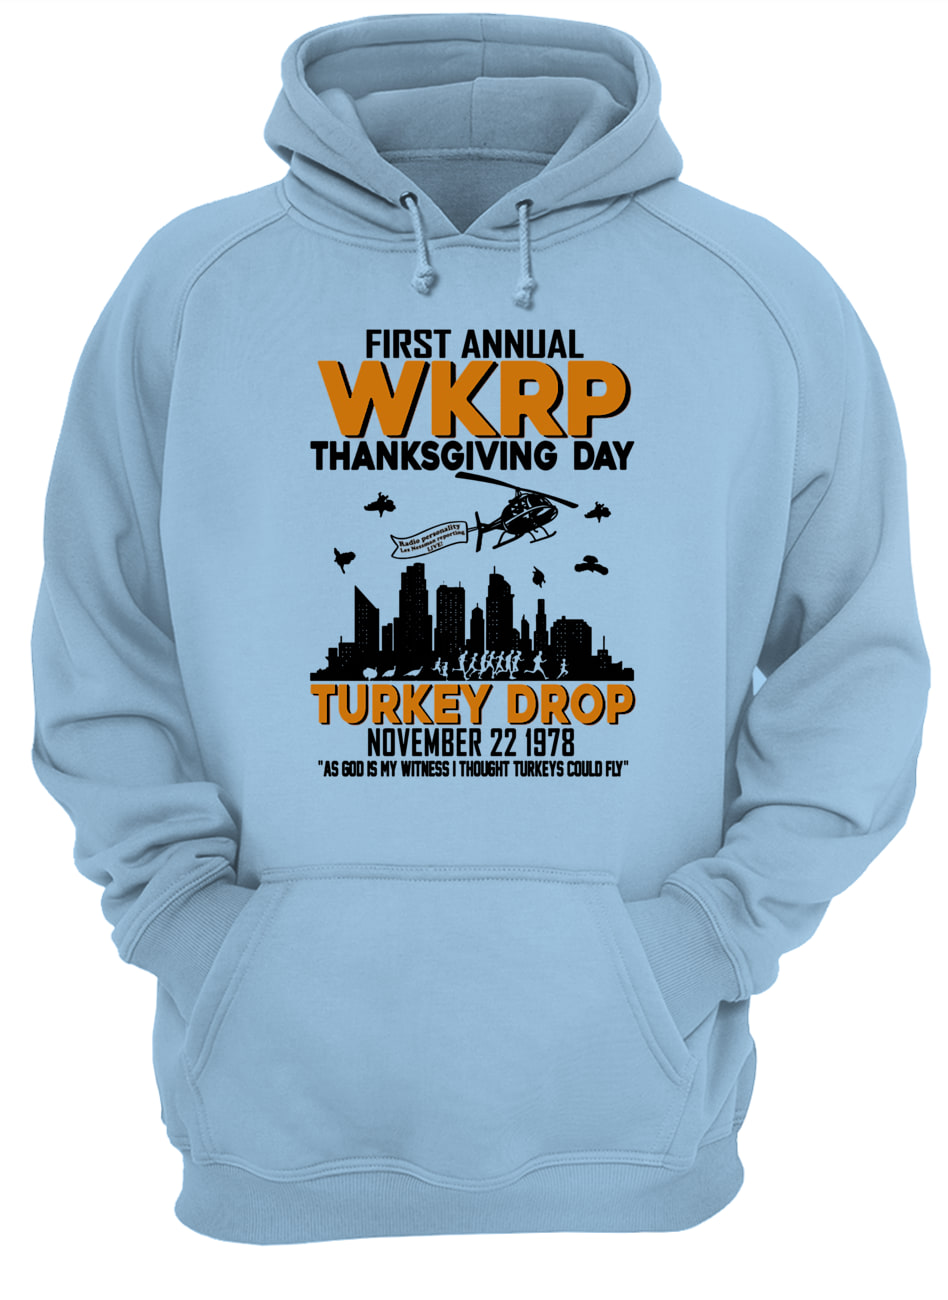 First annual wkrp thanksgiving day turkey drop november 22 1978 hoodie